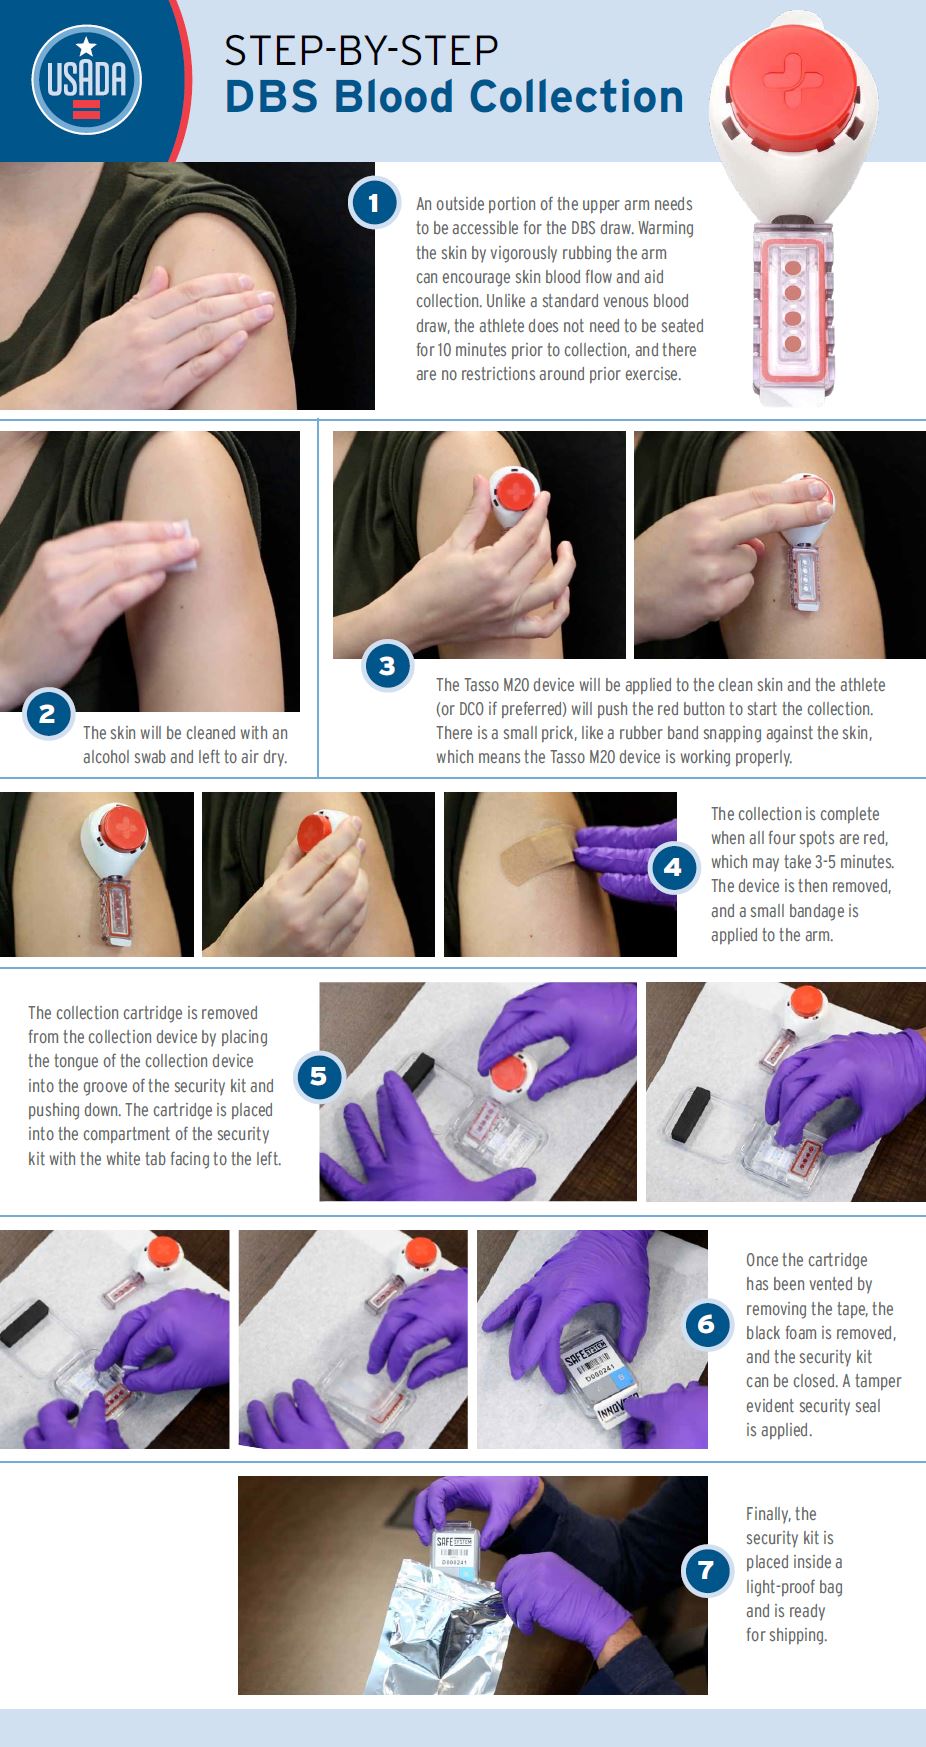 Dried Blood Spot testing how-to infographic.